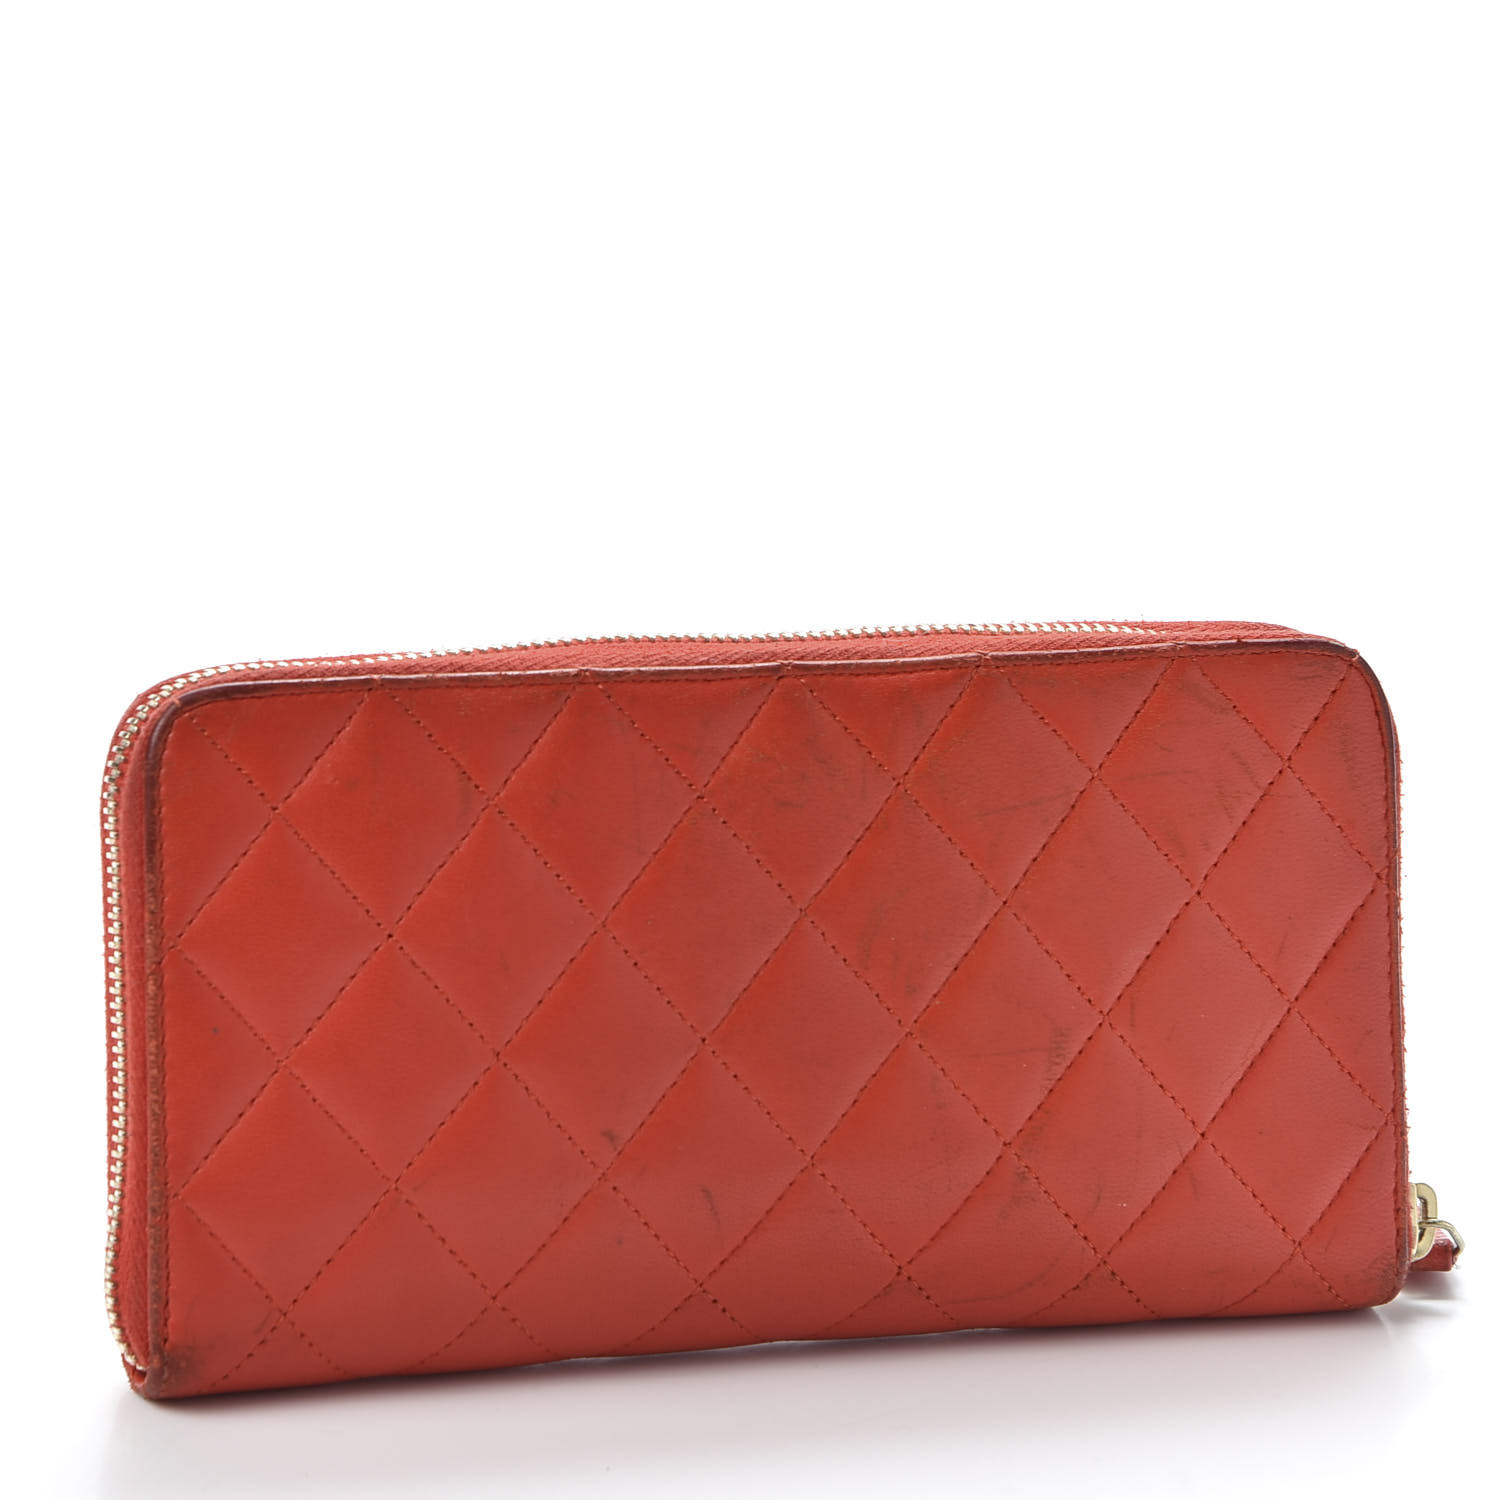 CHANEL Lambskin Quilted Large Gusset Zip Around Wallet Red 582280